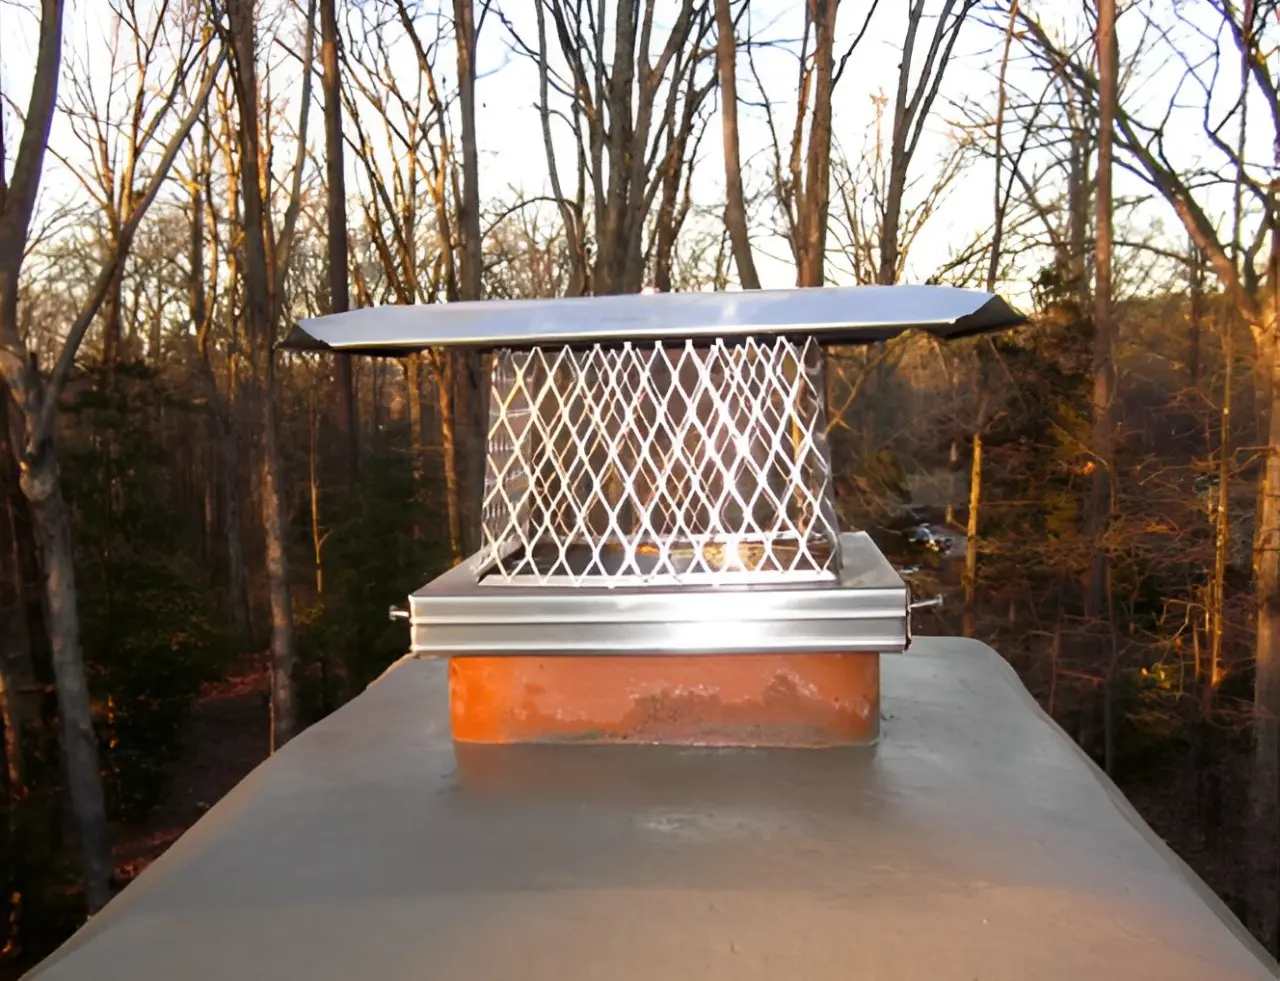 A metal chimney cap sitting on top of a roof.